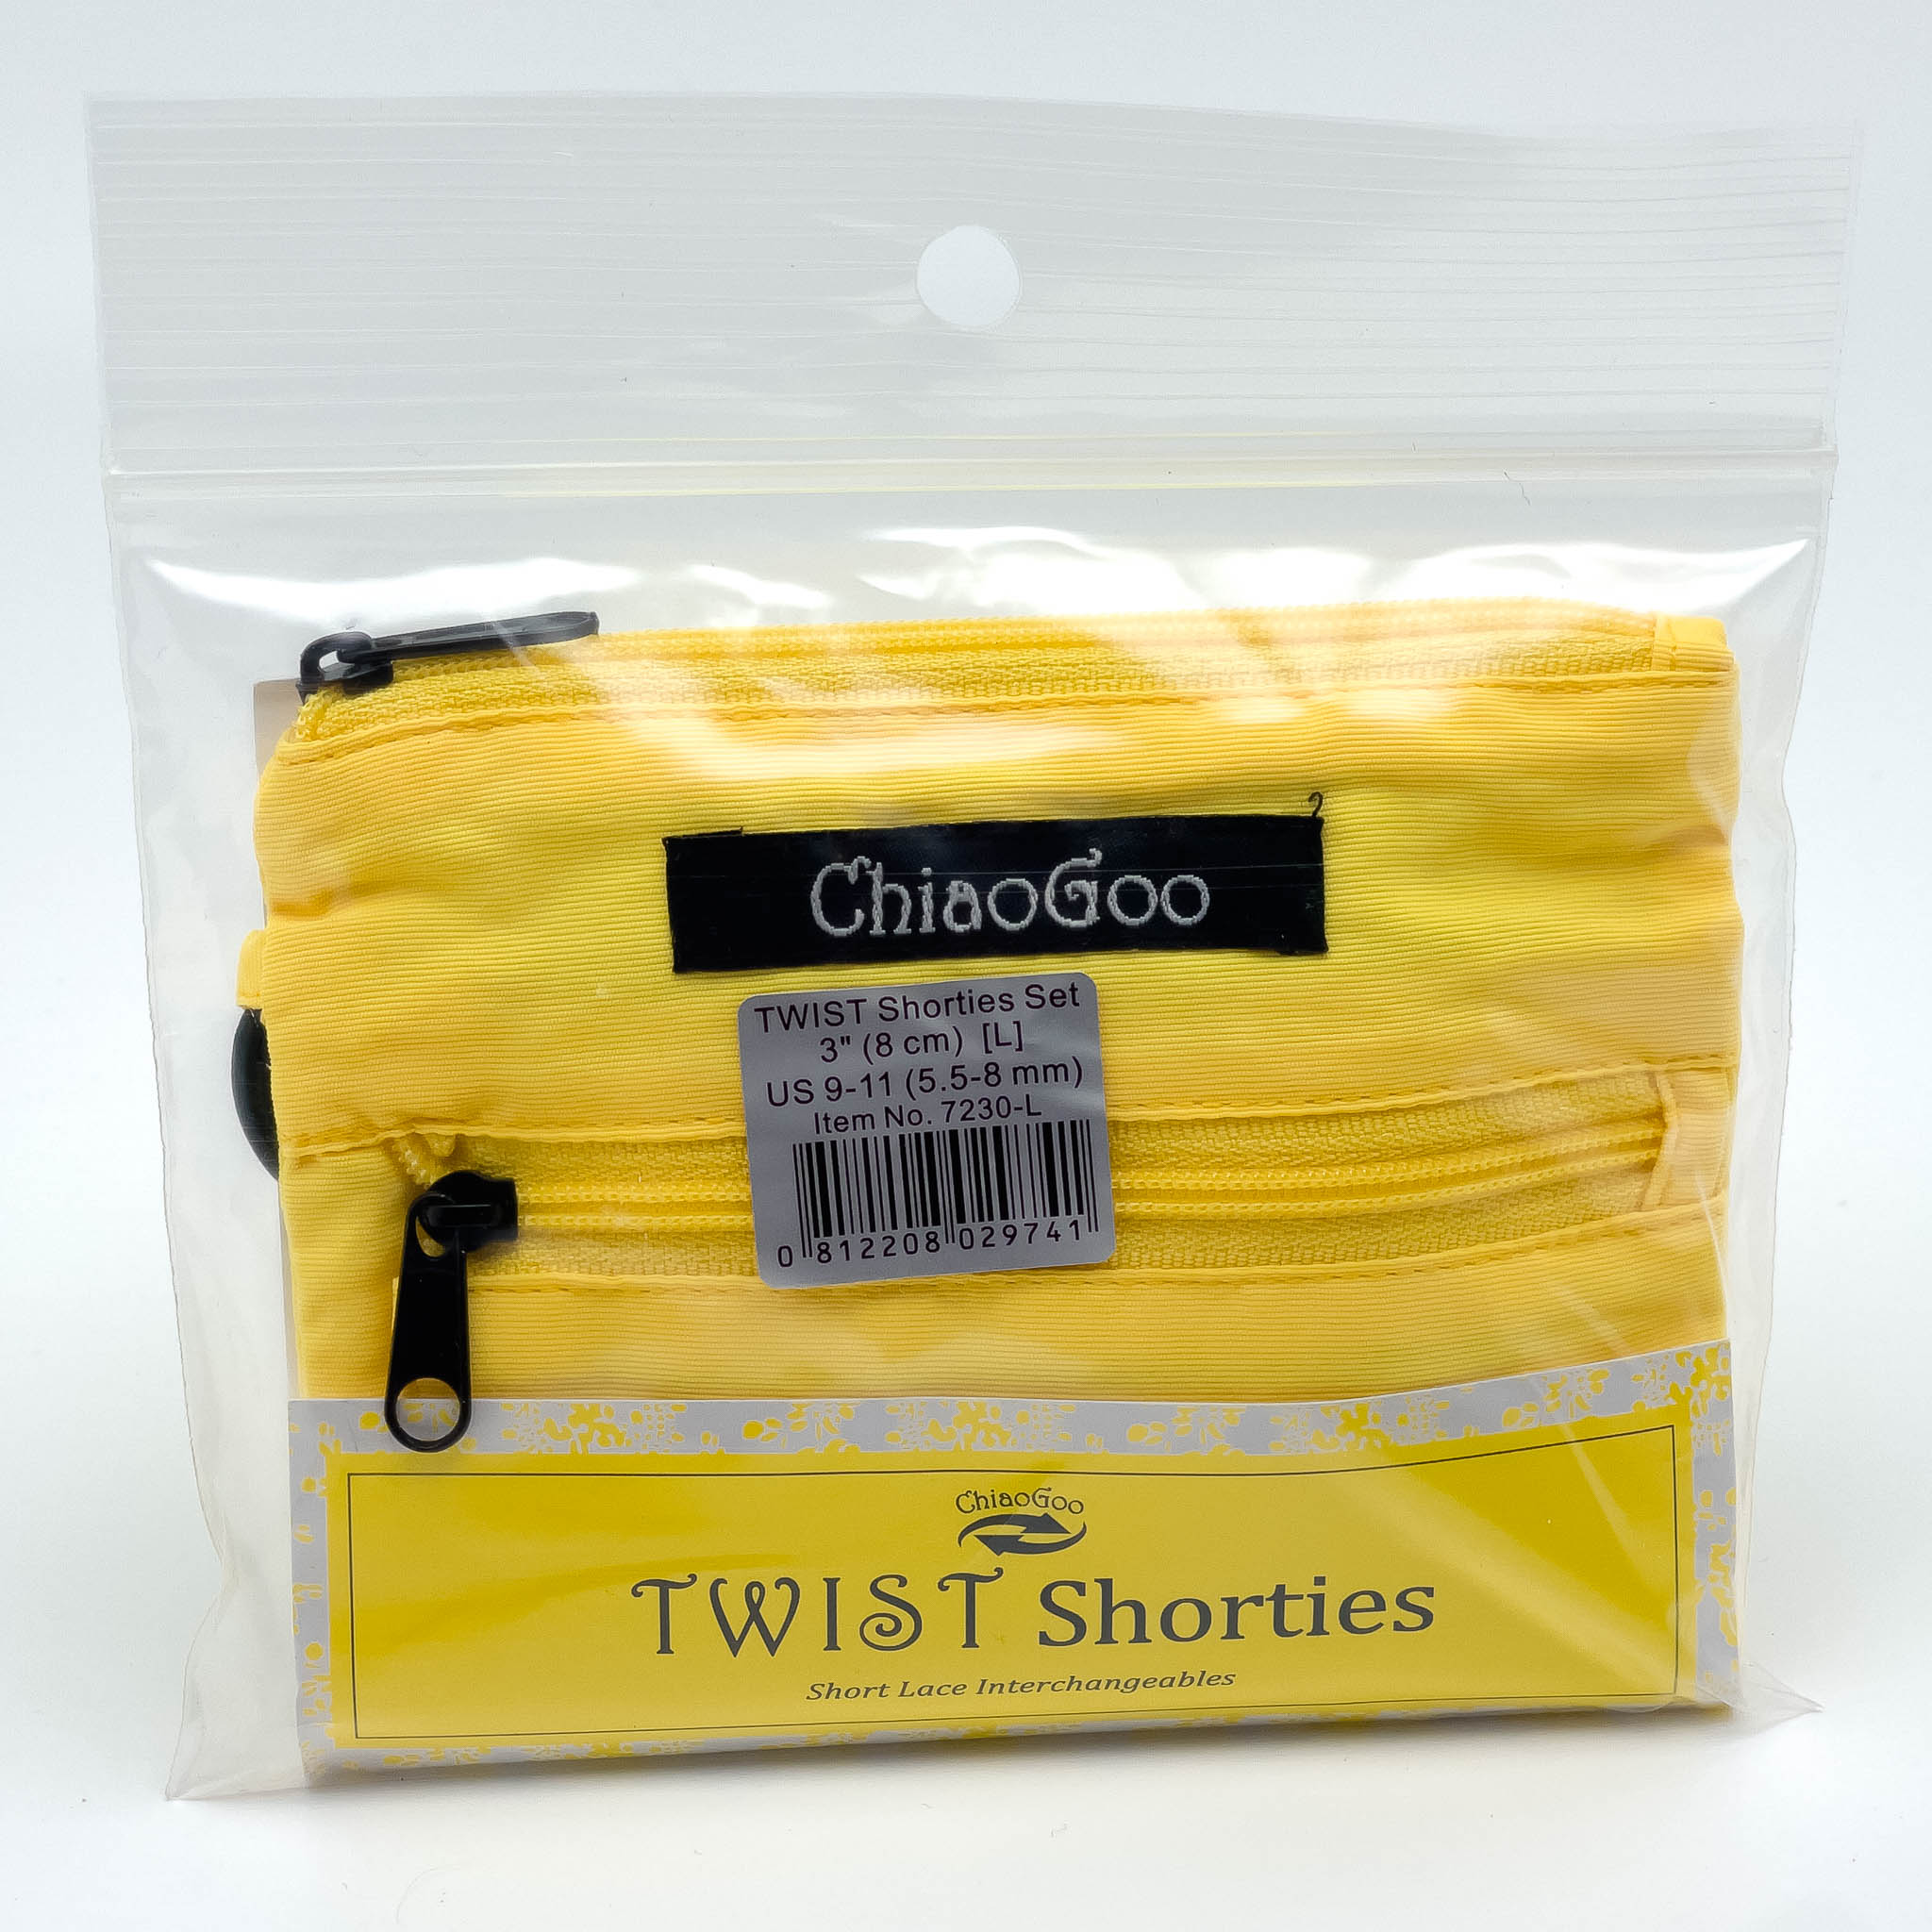  ChiaoGoo Twist Shorties Stainless Steel Interchangeable Set,  2-inch and 3-inch (5 and 8cm) Small (7230-S)